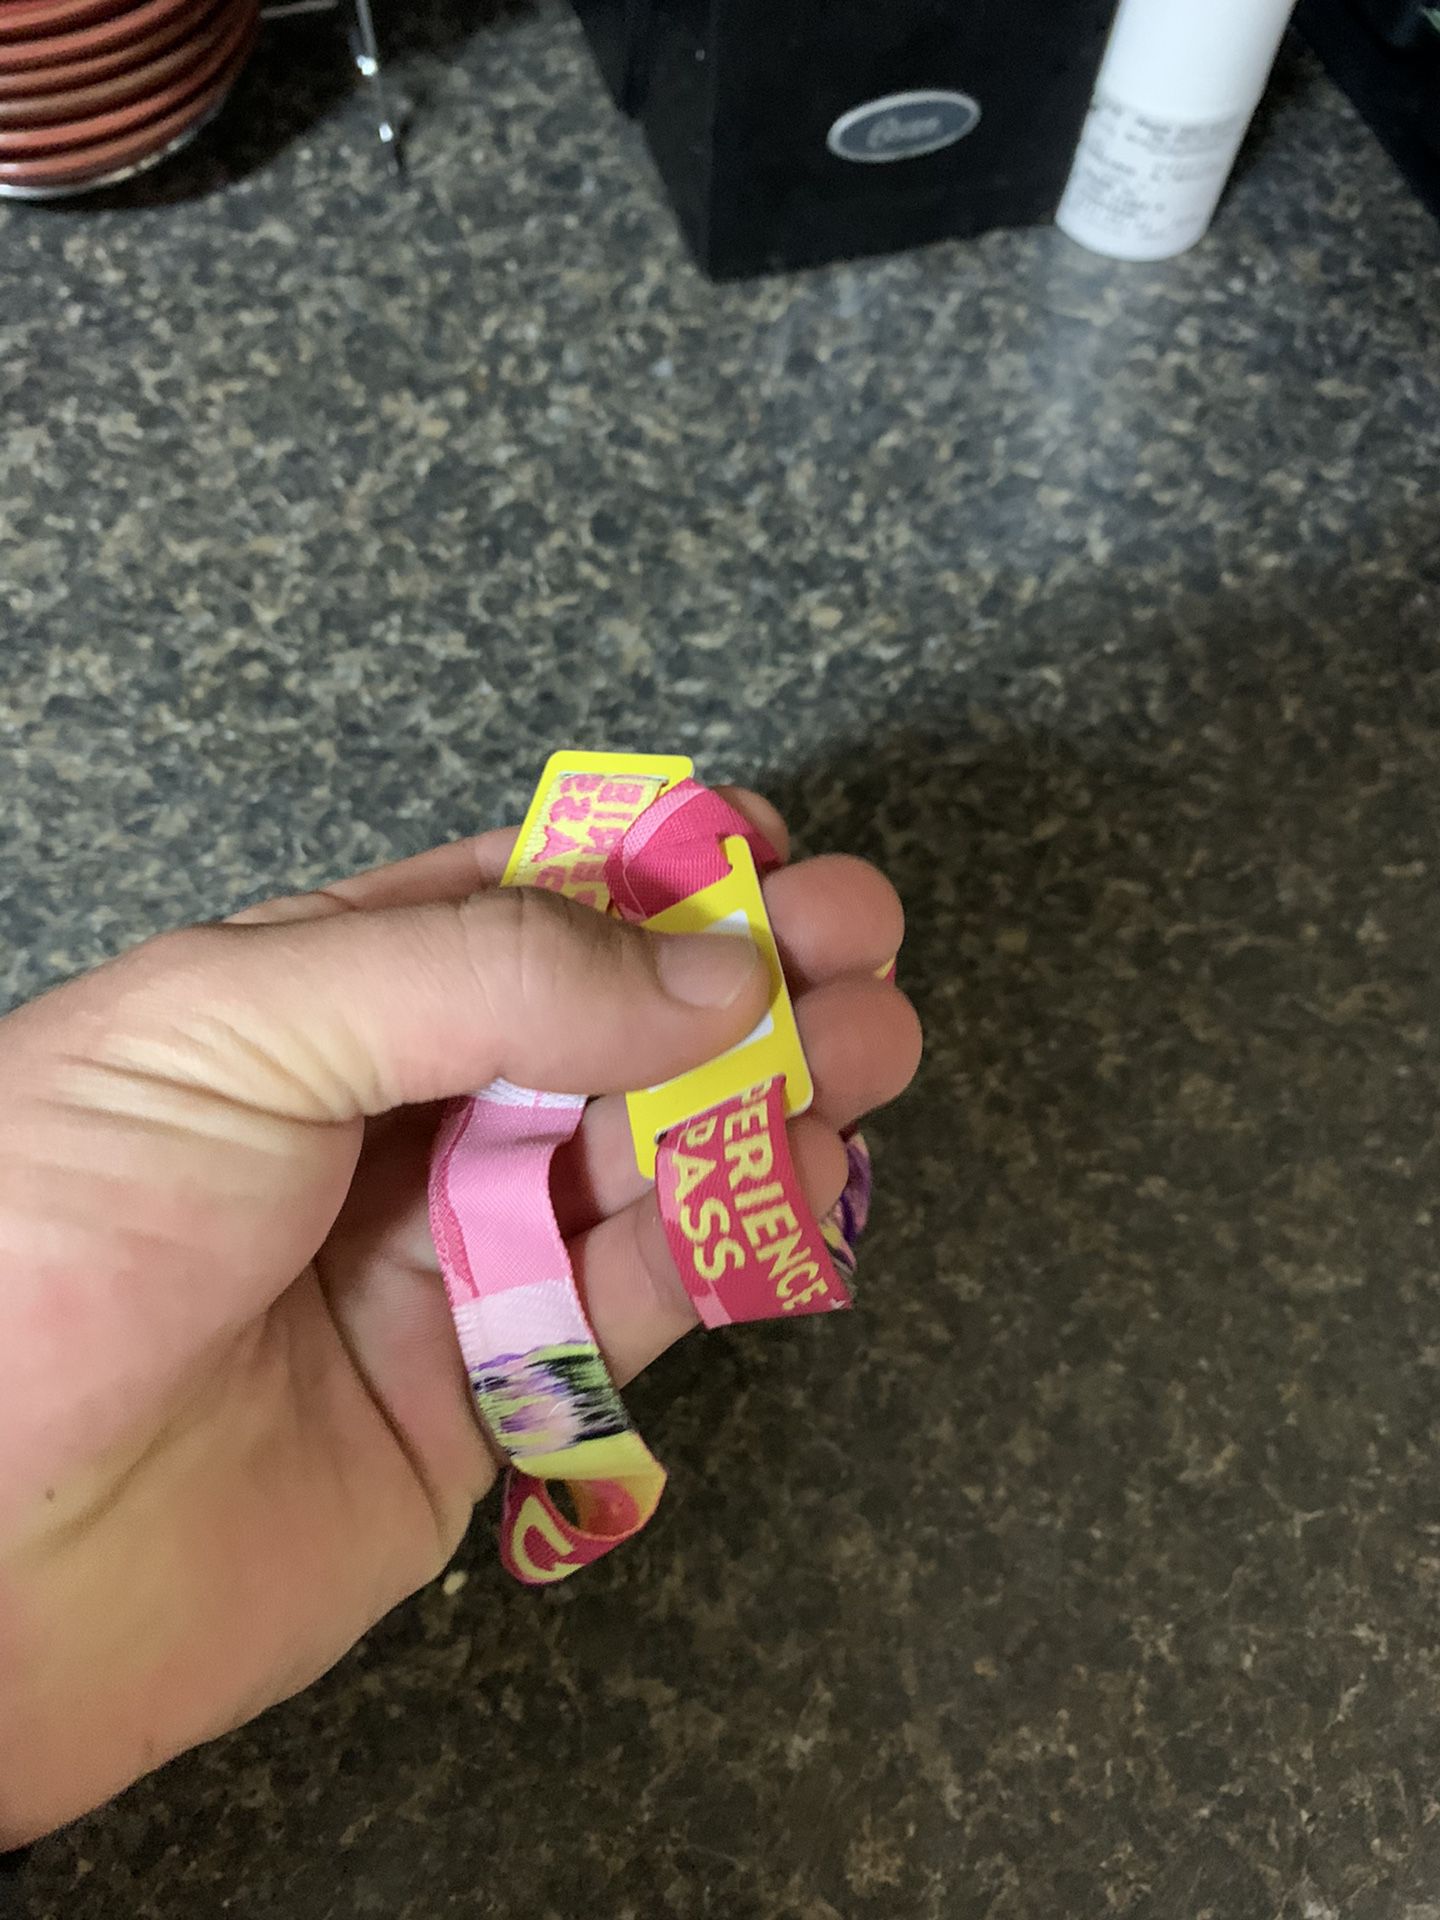 EDC band for 3 days selling quick for $160